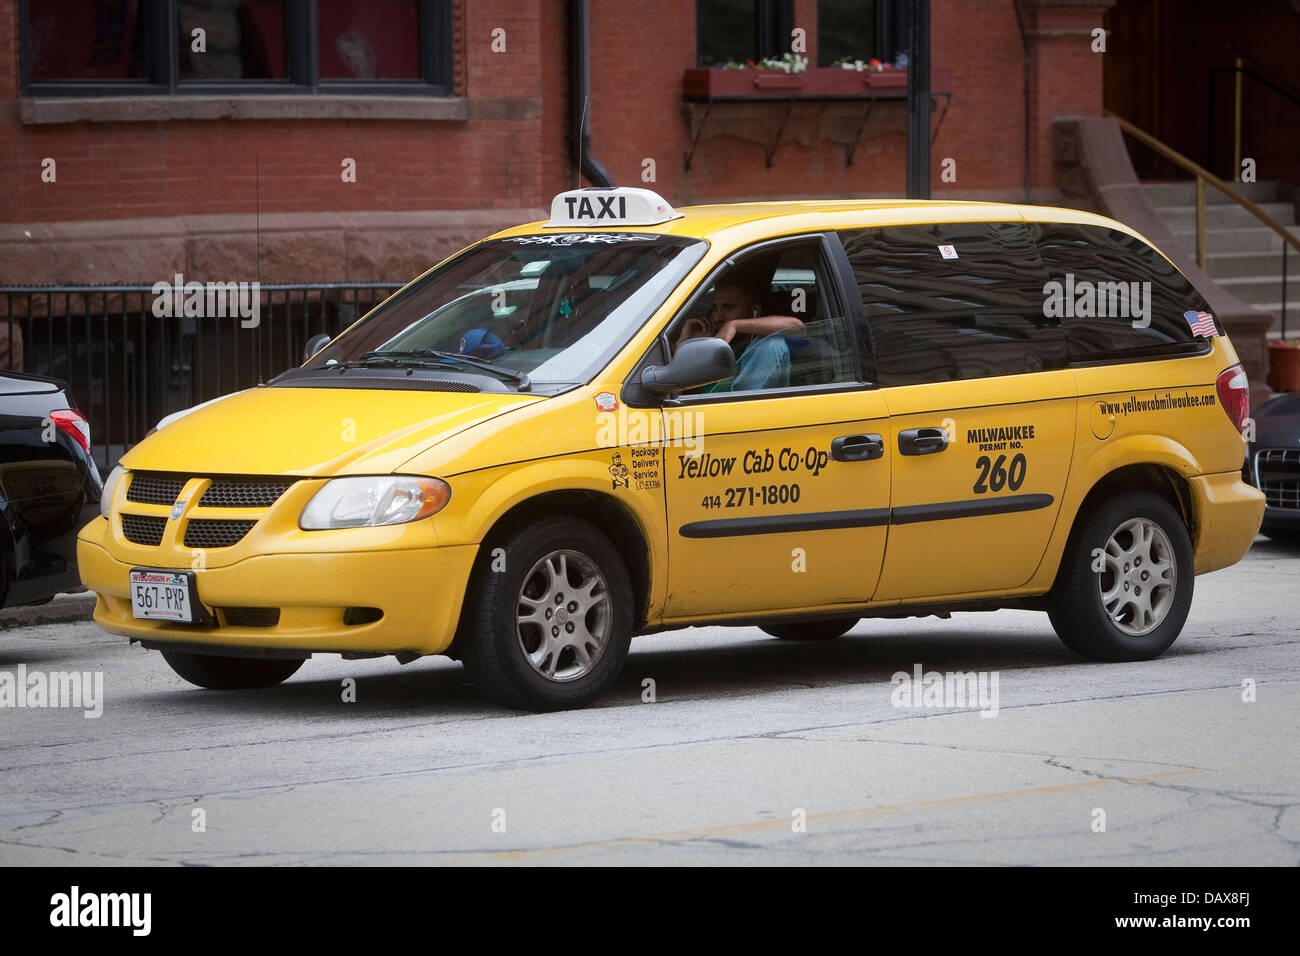 A Yellow Cab Co-Op taxi is seen in Milwaukee Stock Photo